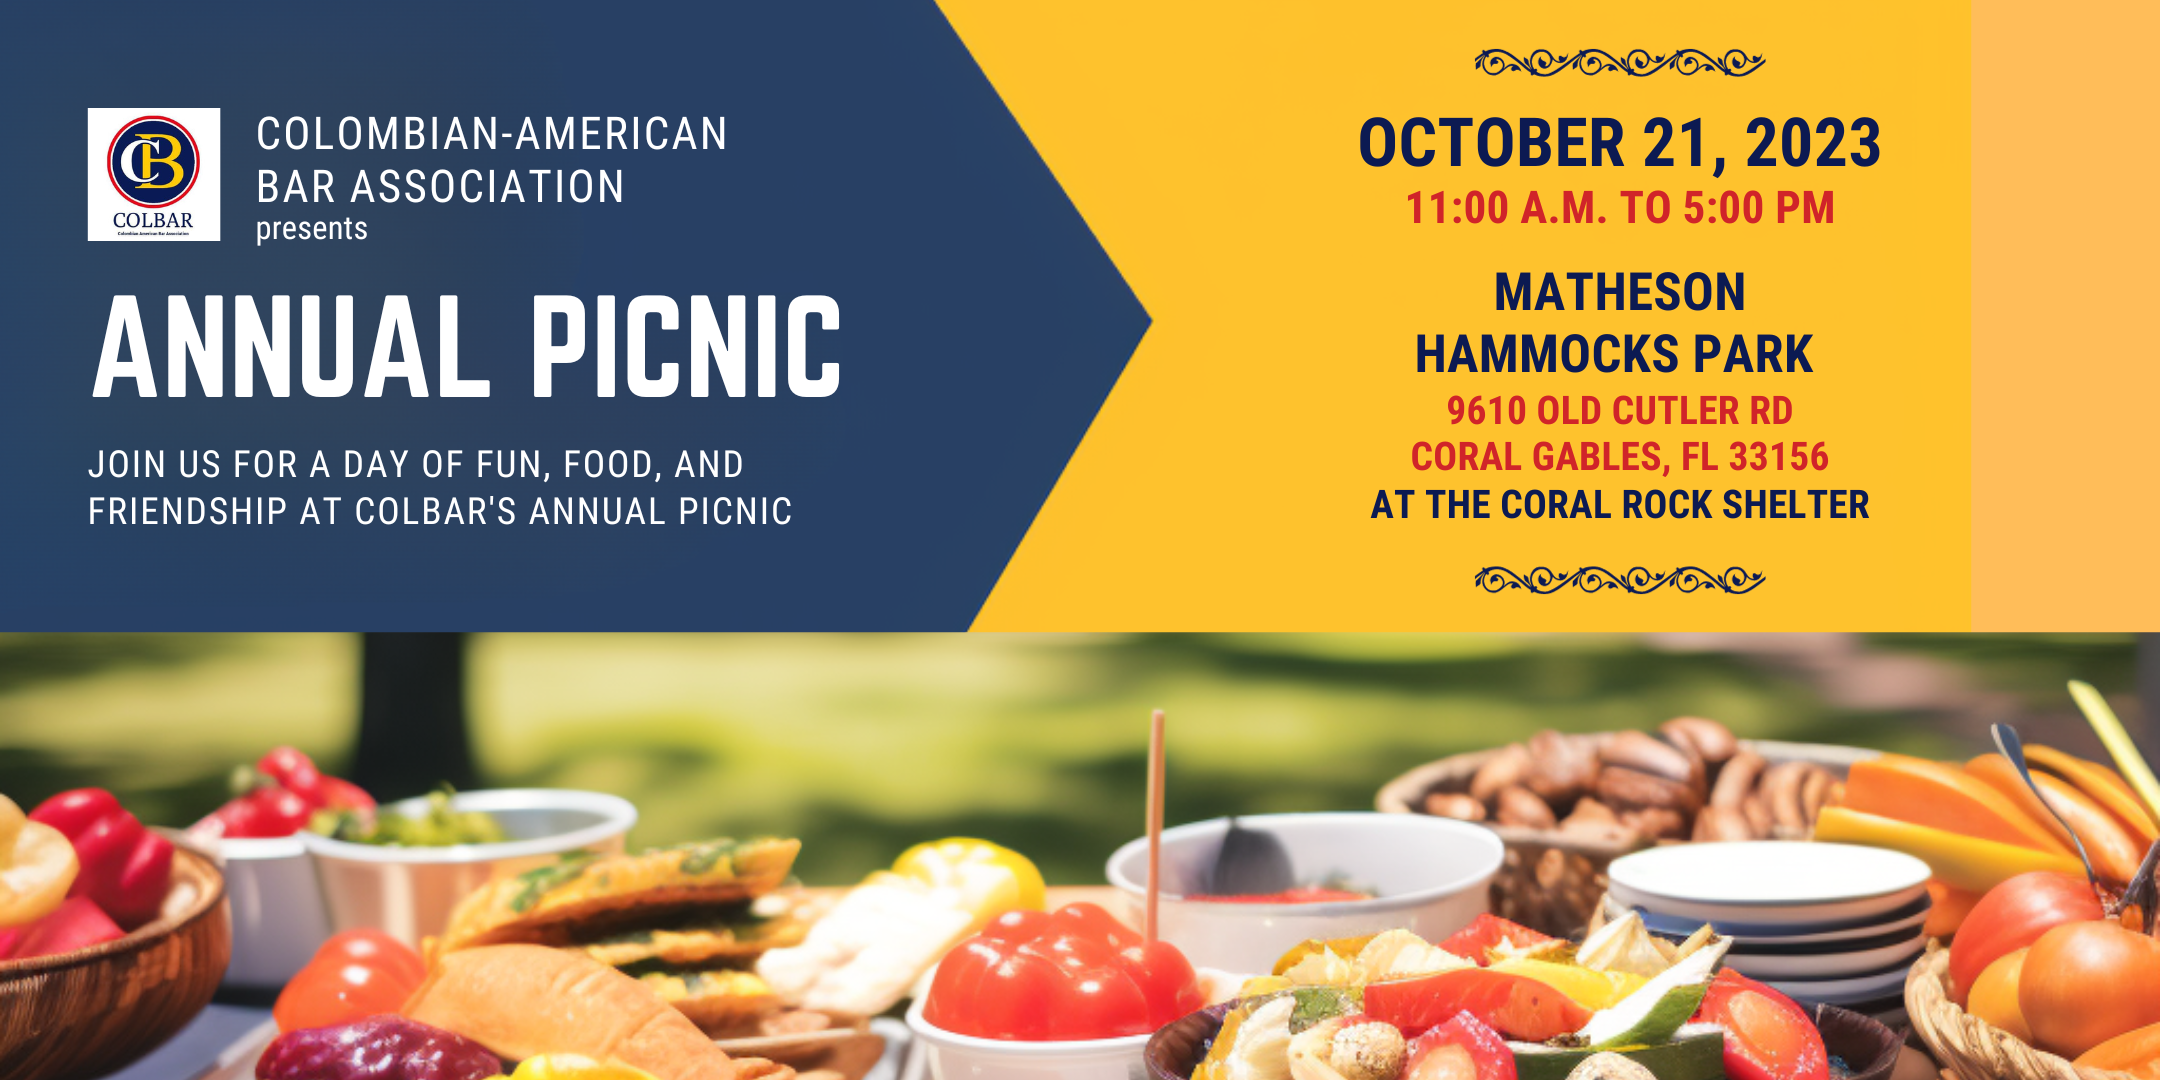 Join Us for a Day of Fun, Food, and Friendship at COLBAR’s Annual Picnic!